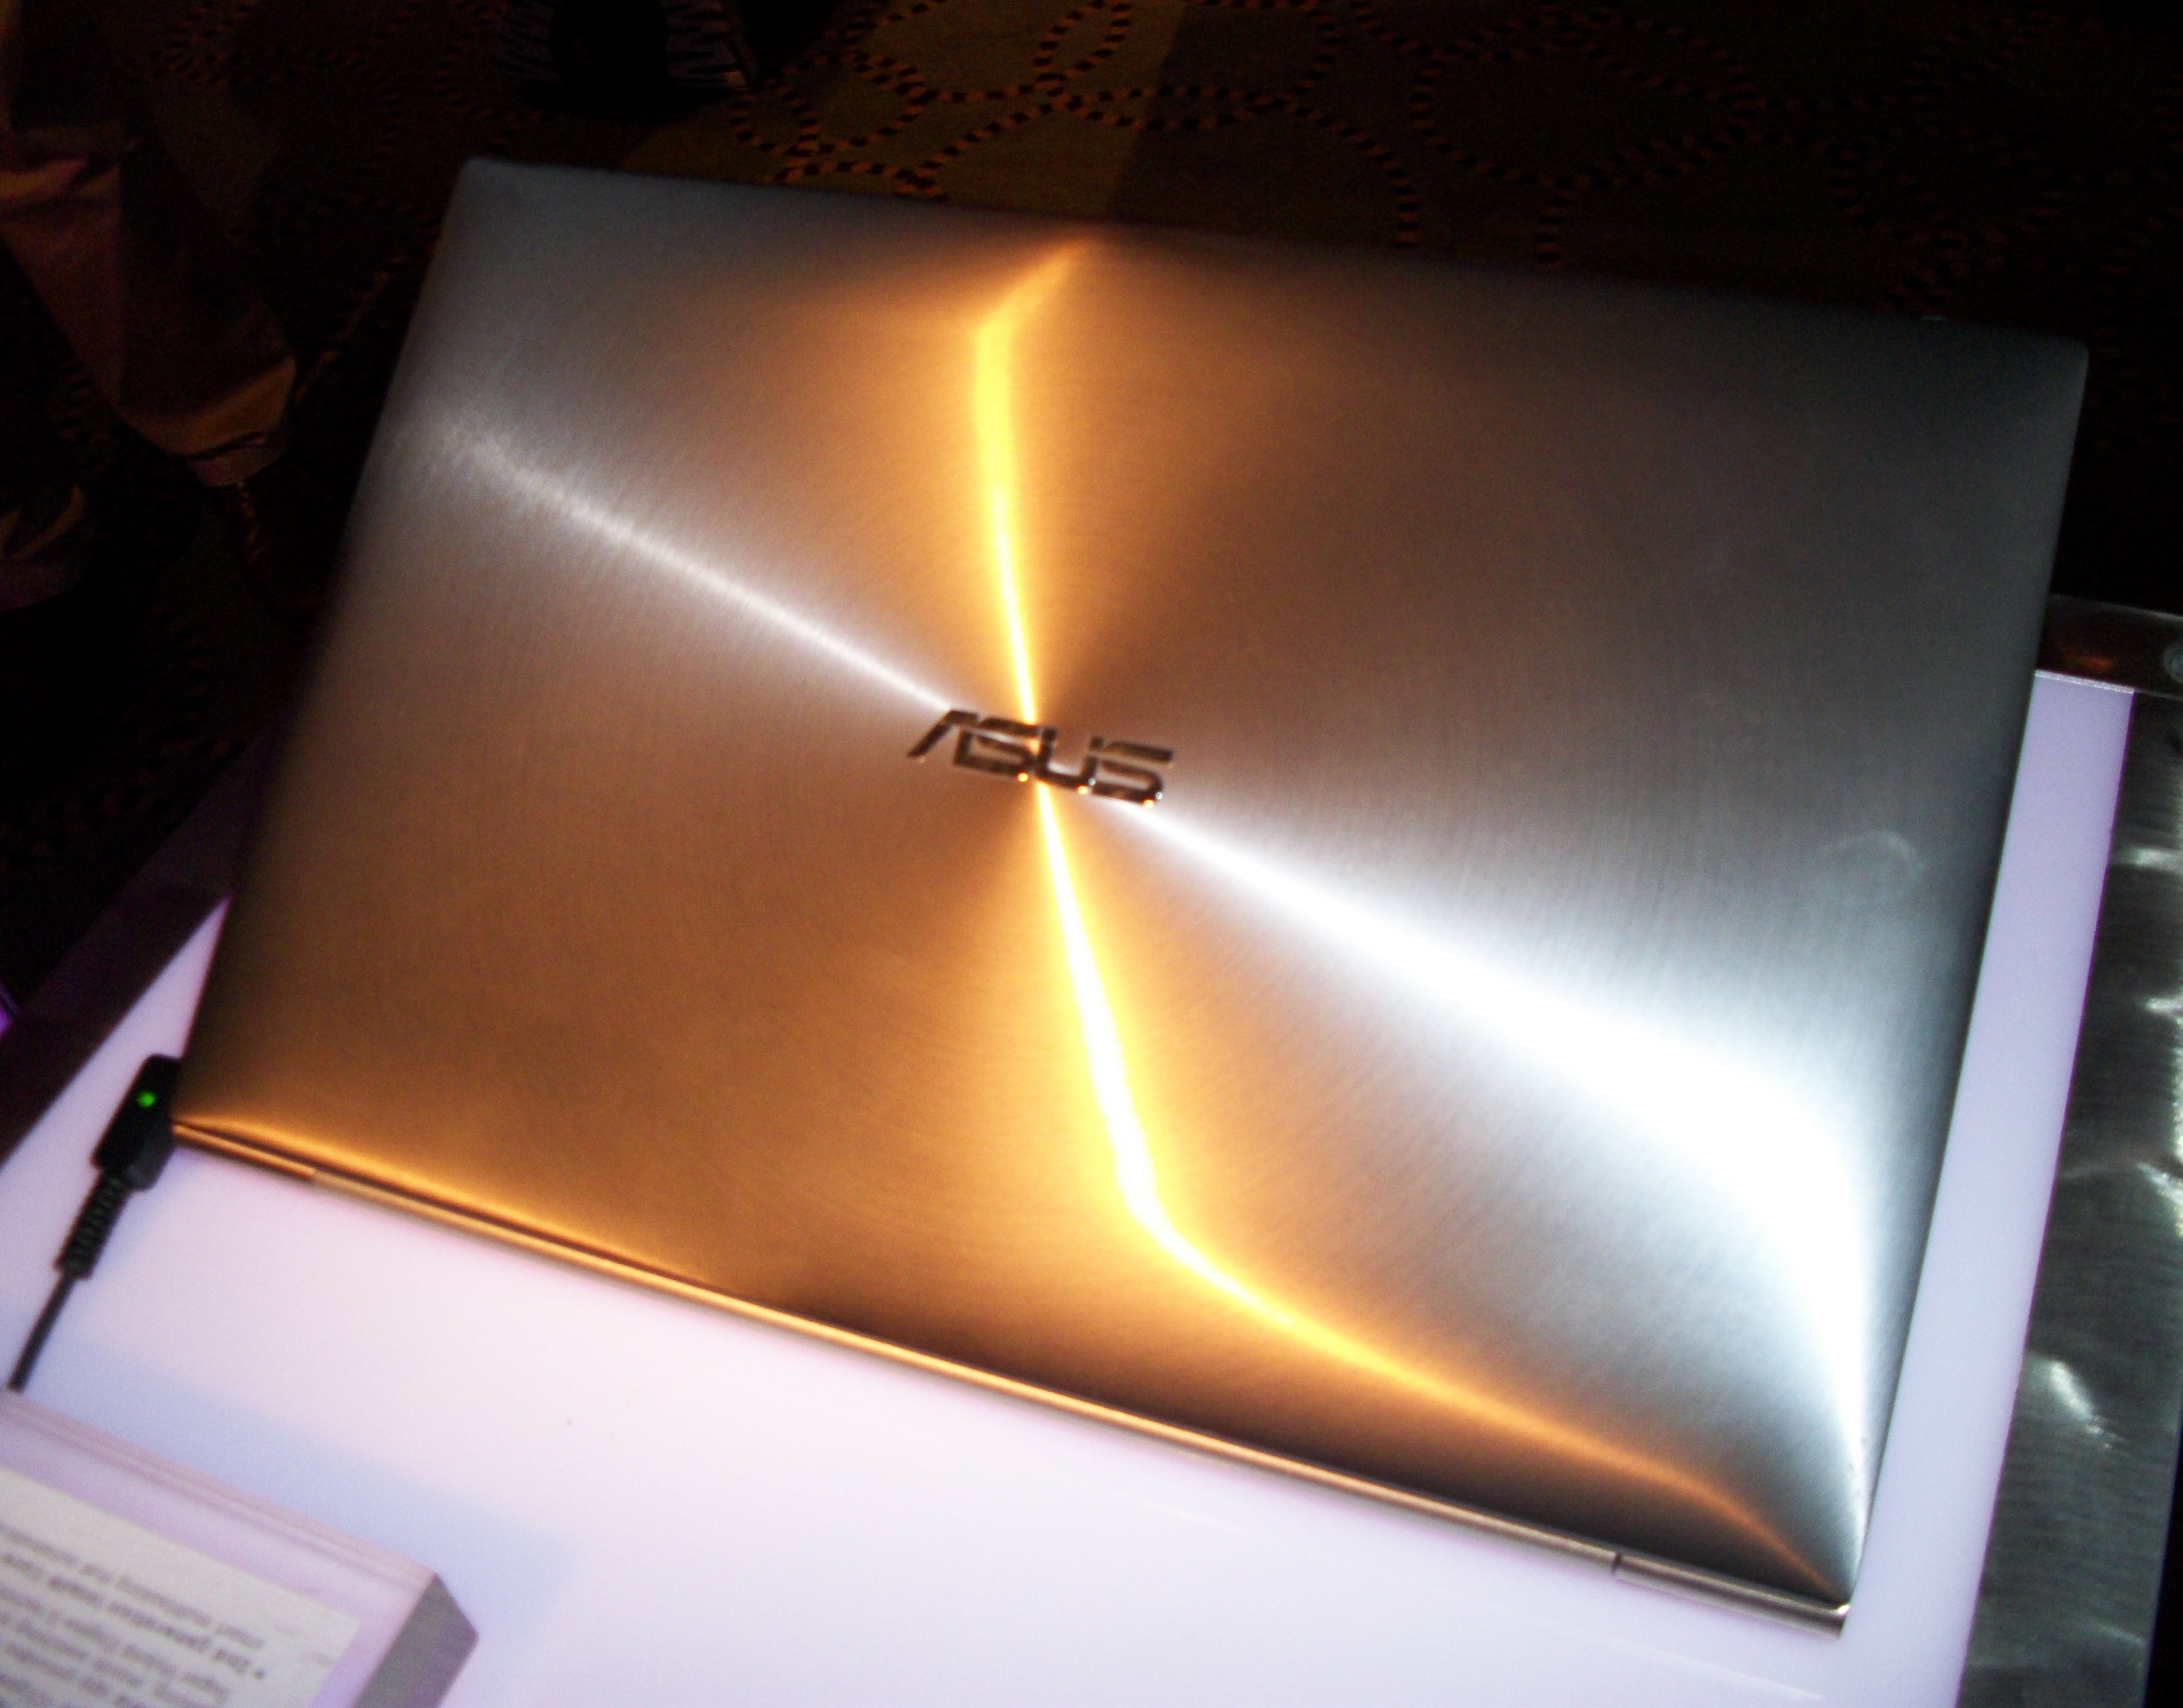 Asus launches Zenbook UX21 and UX31. Image by Gloria Sin